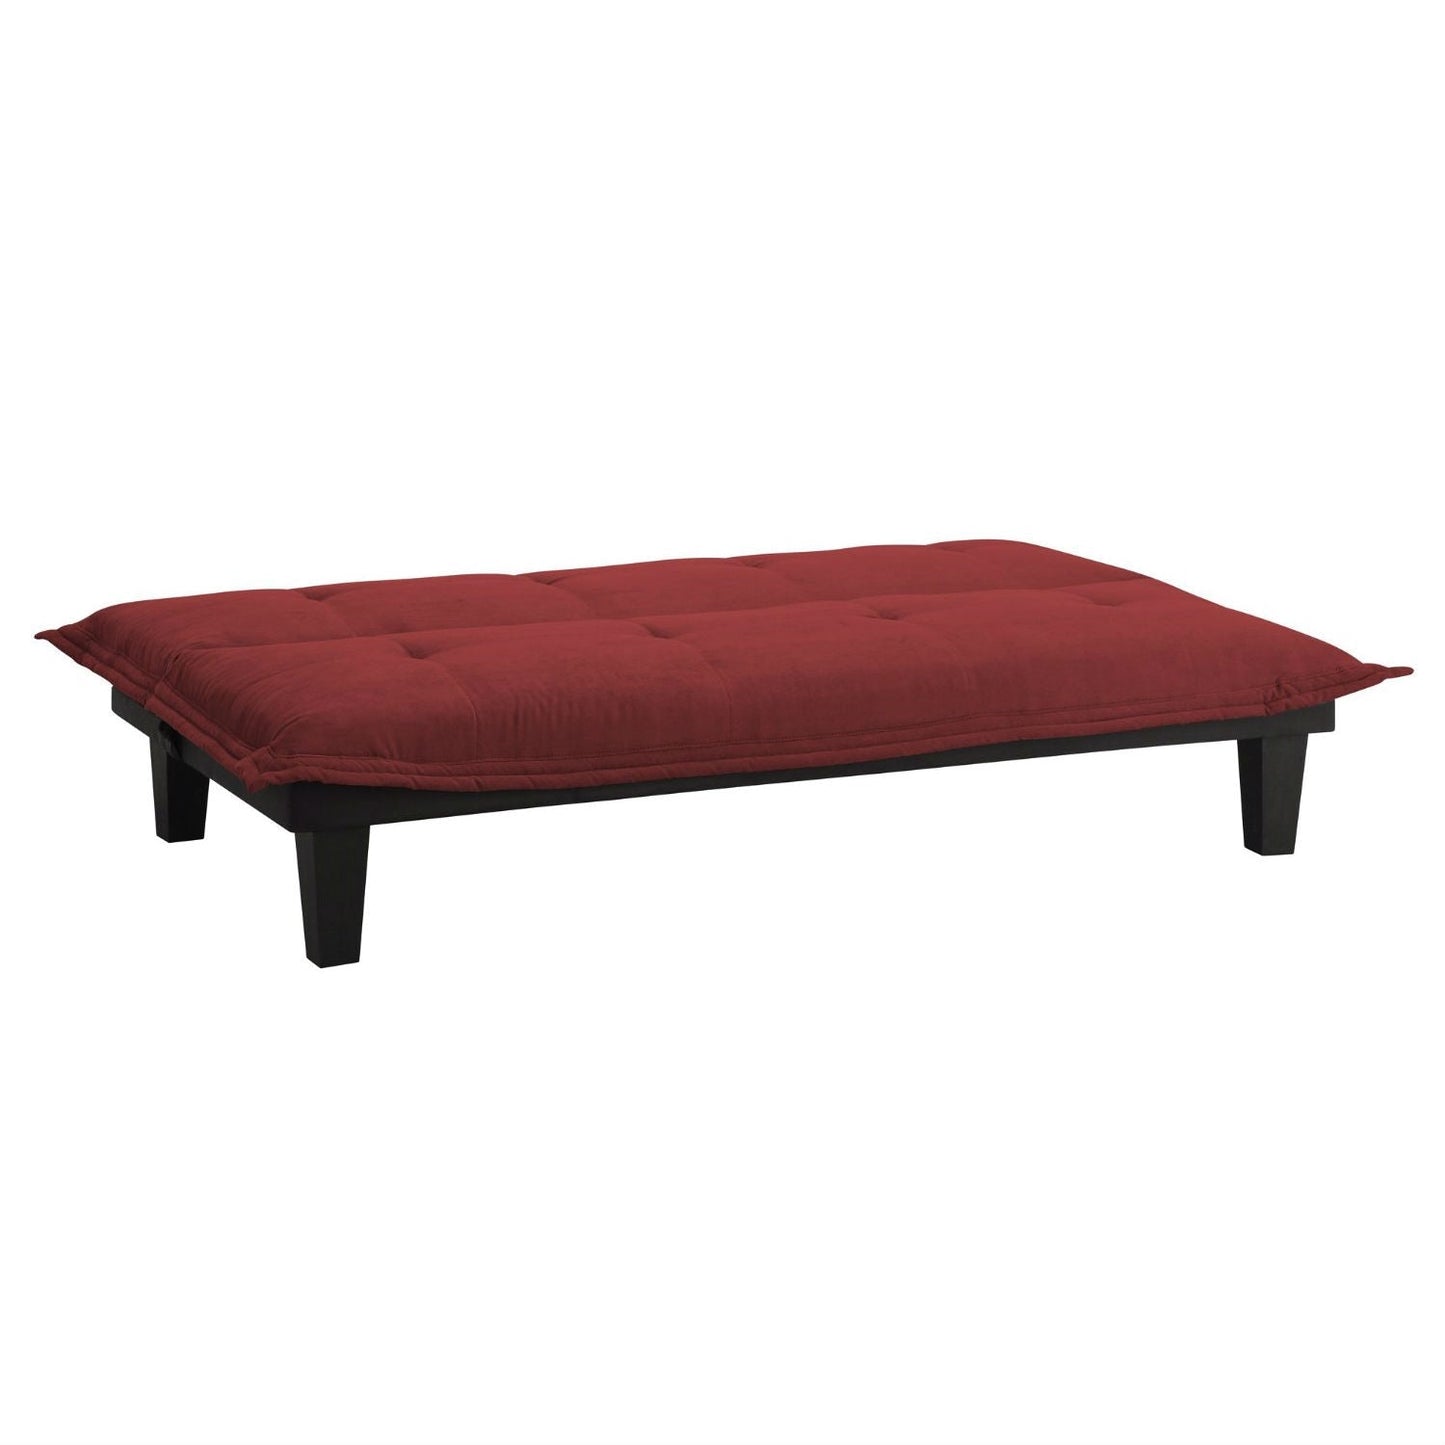 Living Room > Sofas - Contemporary Futon Style Sleeper Sofa Bed In Red Microfiber